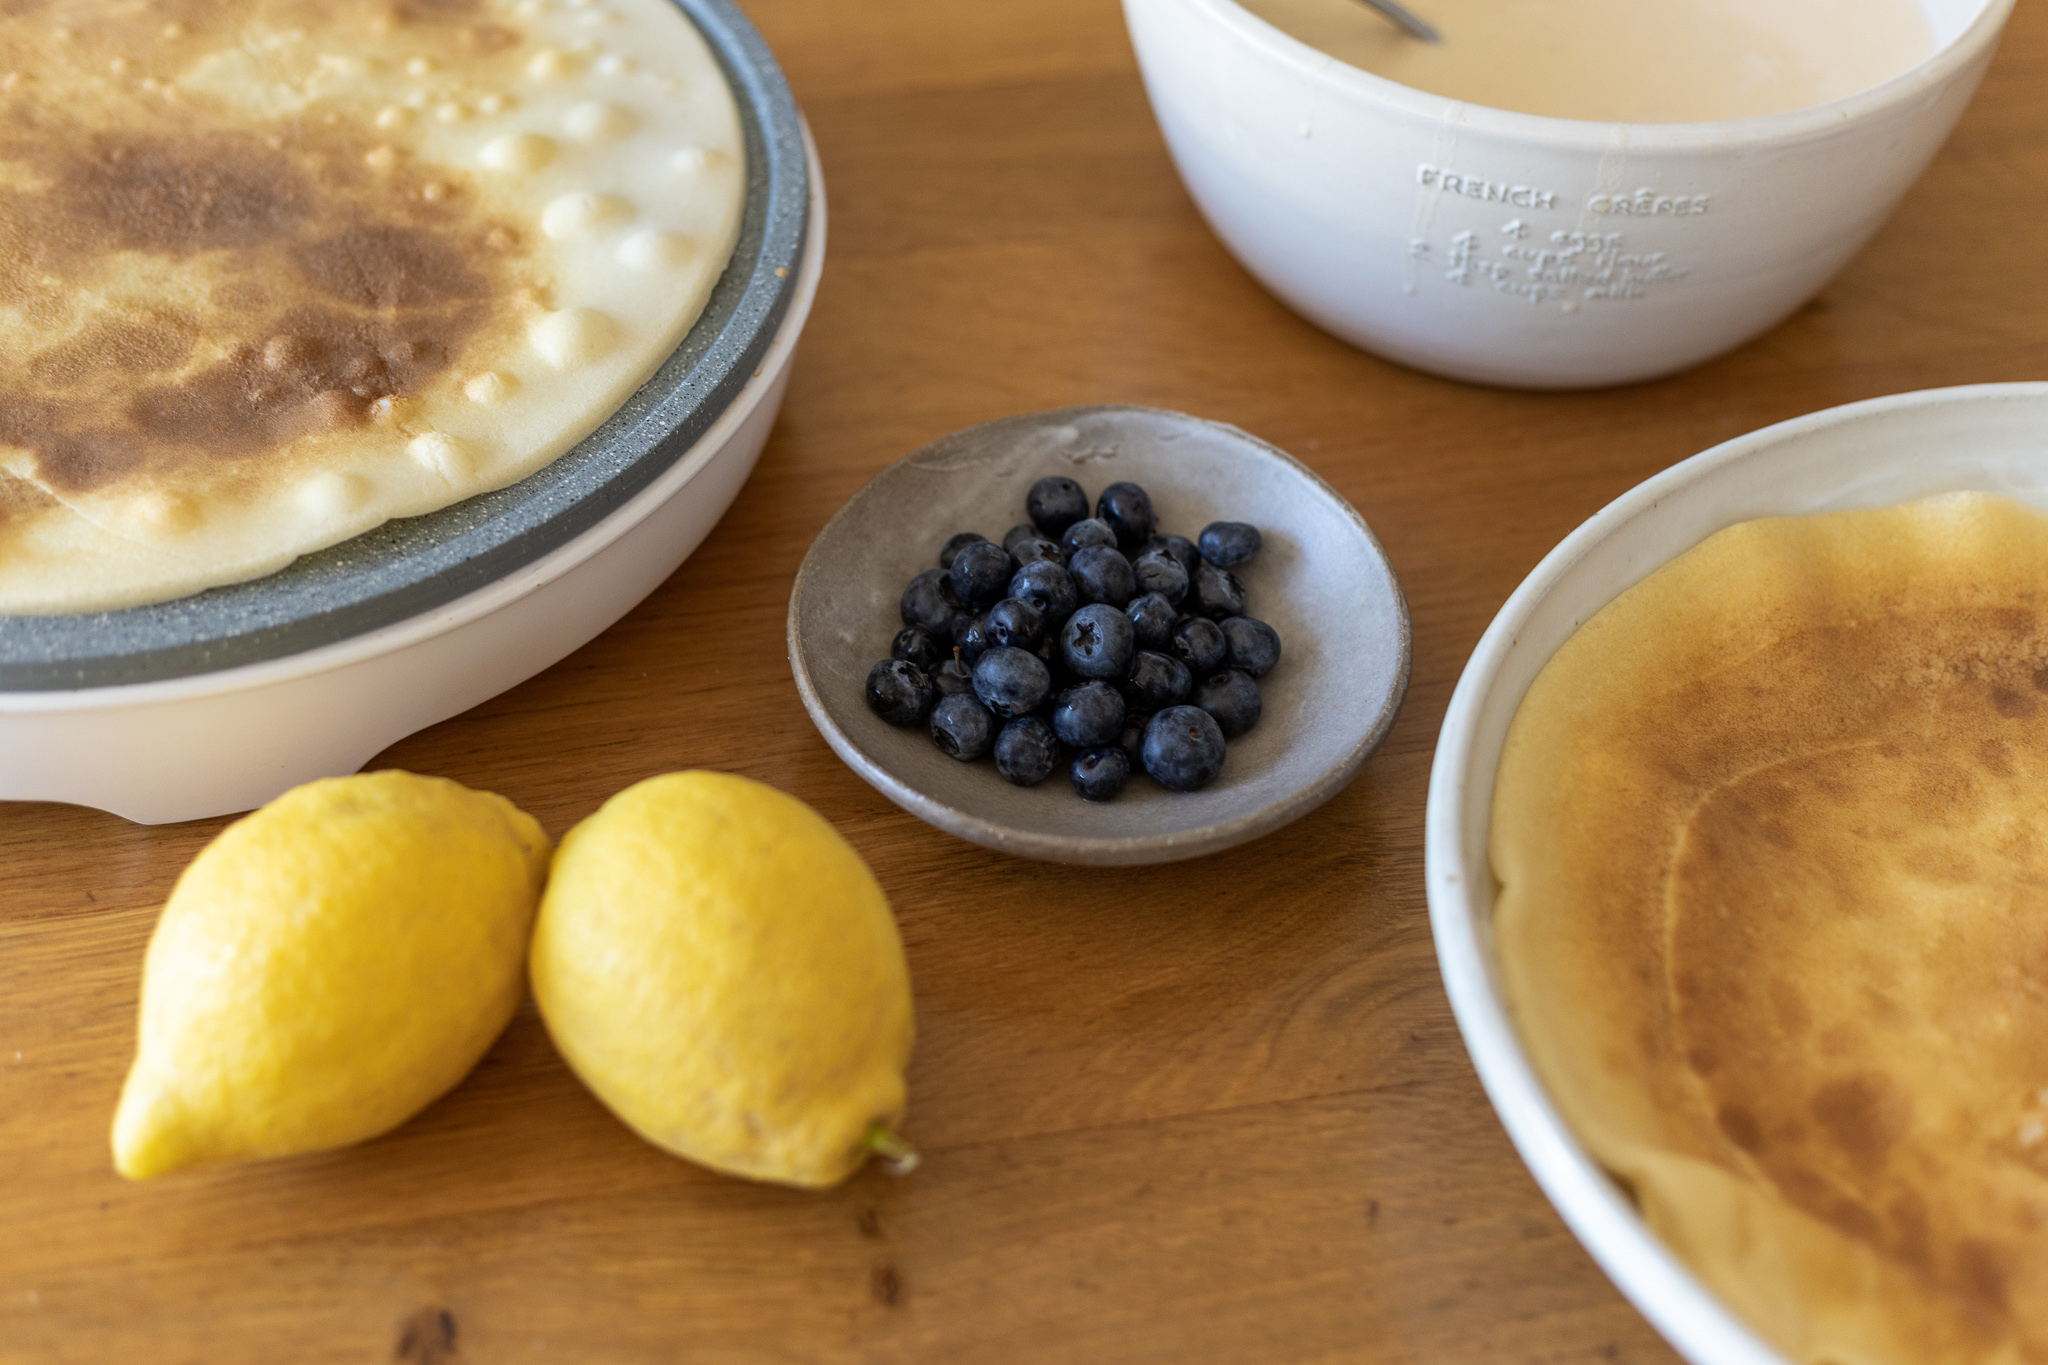 Crepe serving with lemon and blueberry